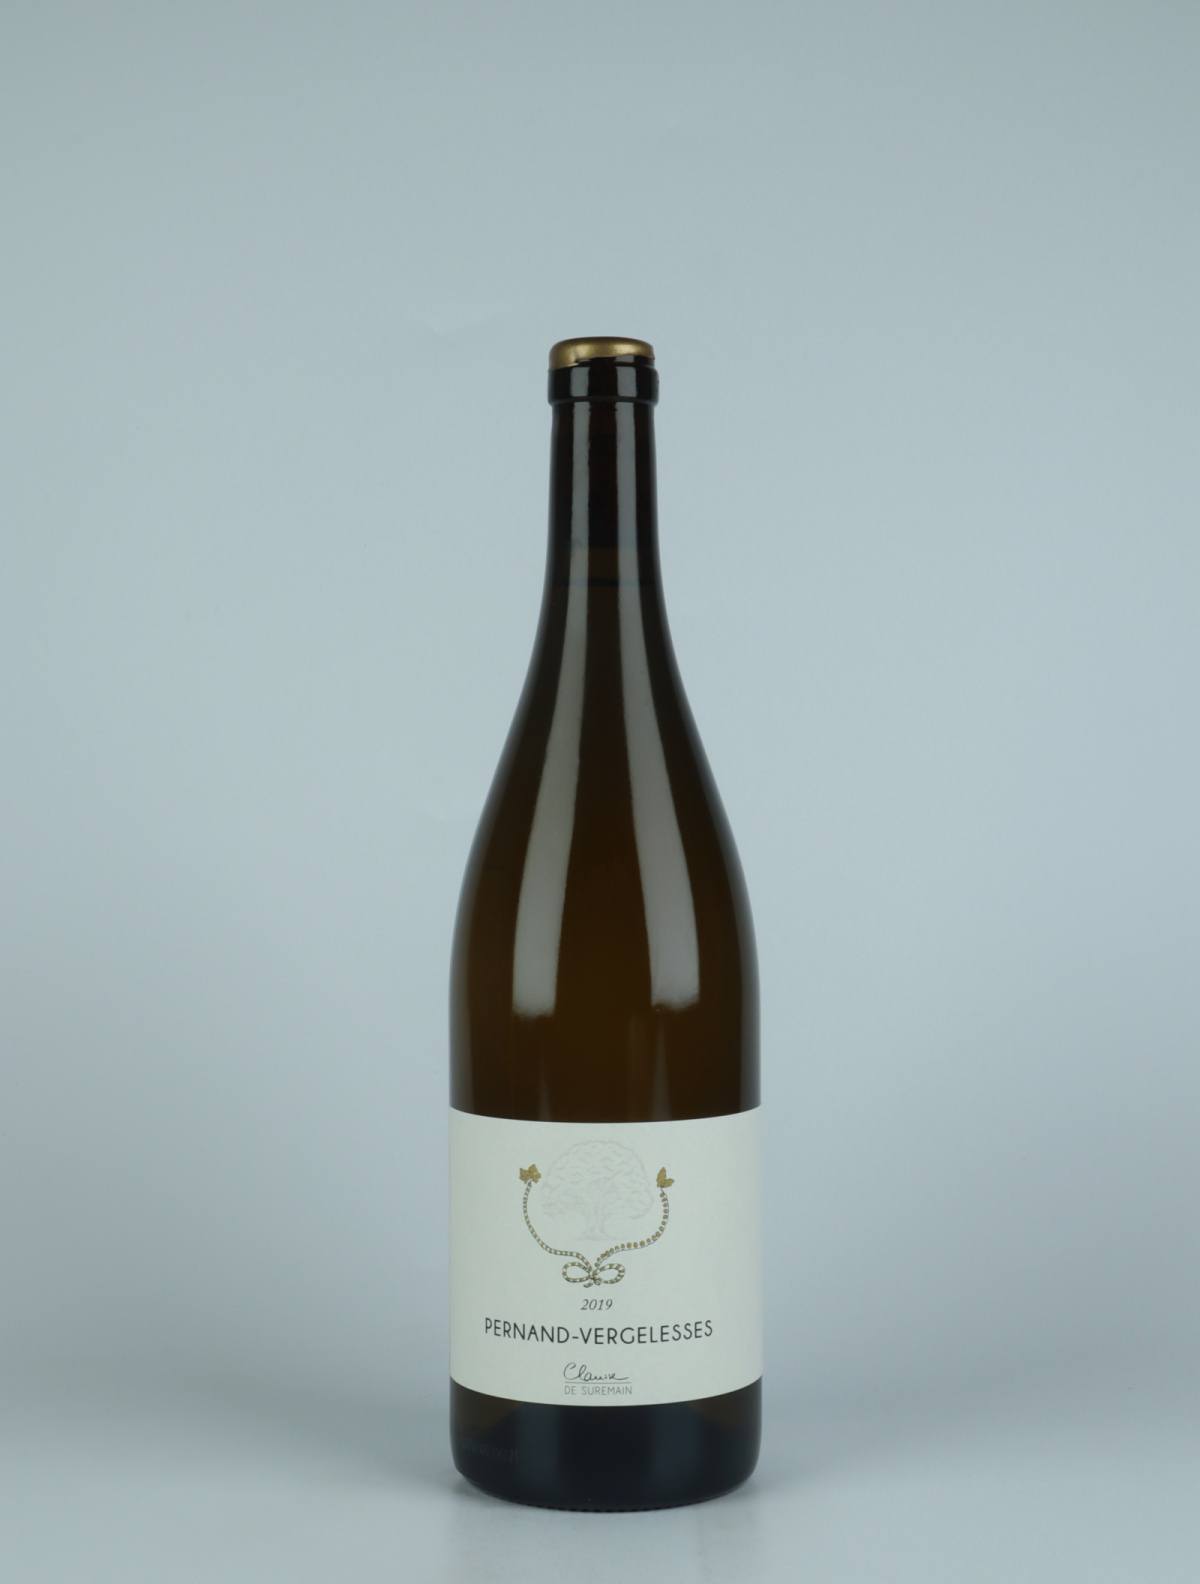 A bottle 2019 Pernand-Vergelesses White wine from Clarisse de Suremain, Burgundy in France